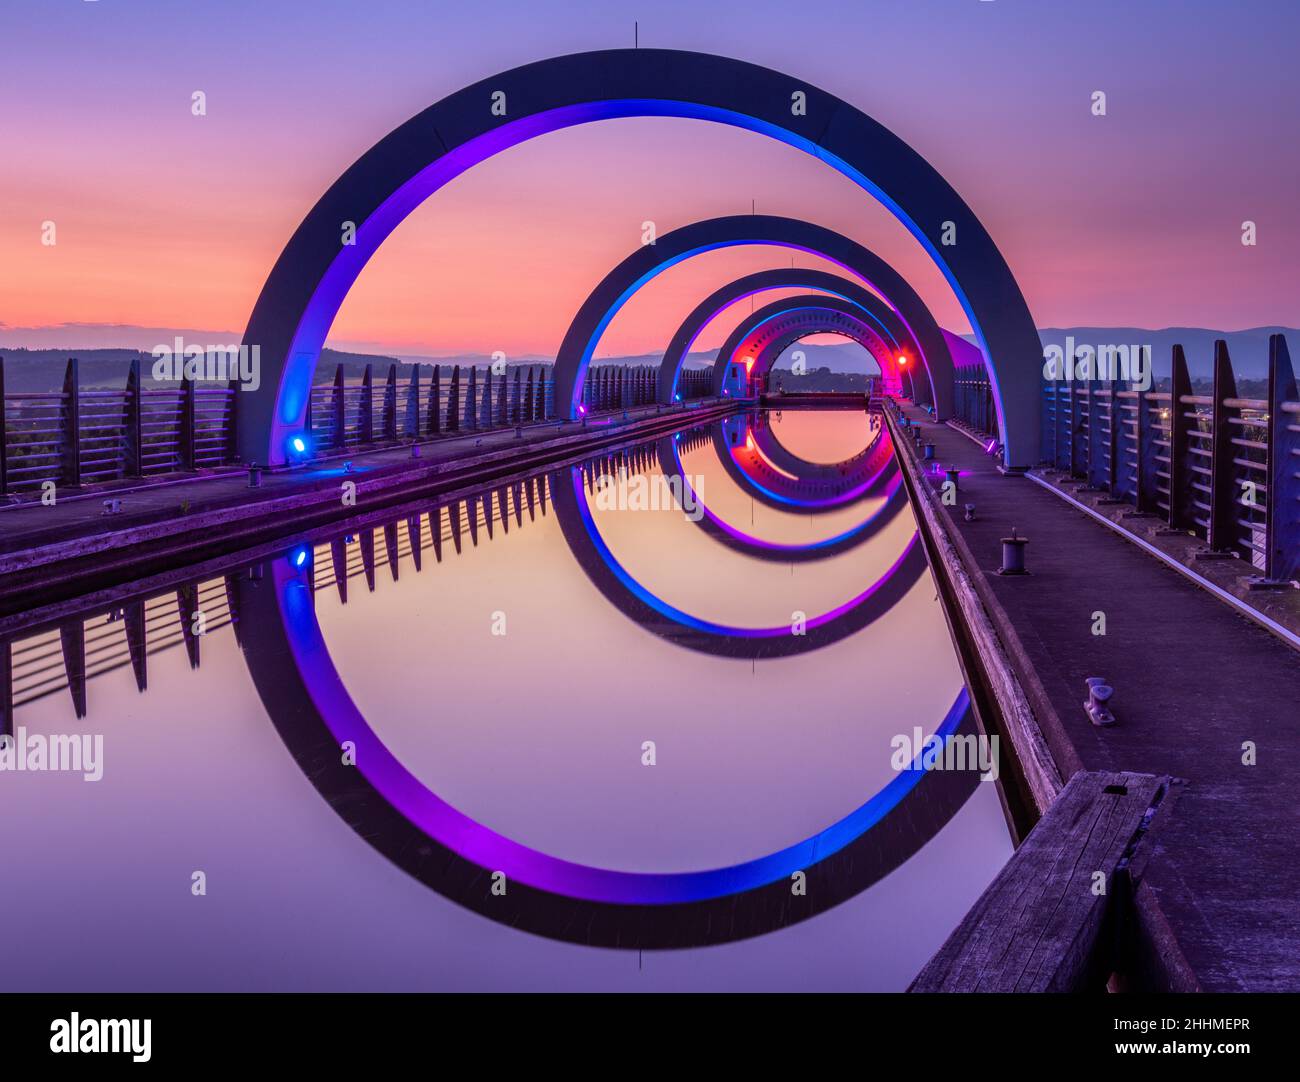 Reflections of The Falkirk Wheel at night Stock Photo